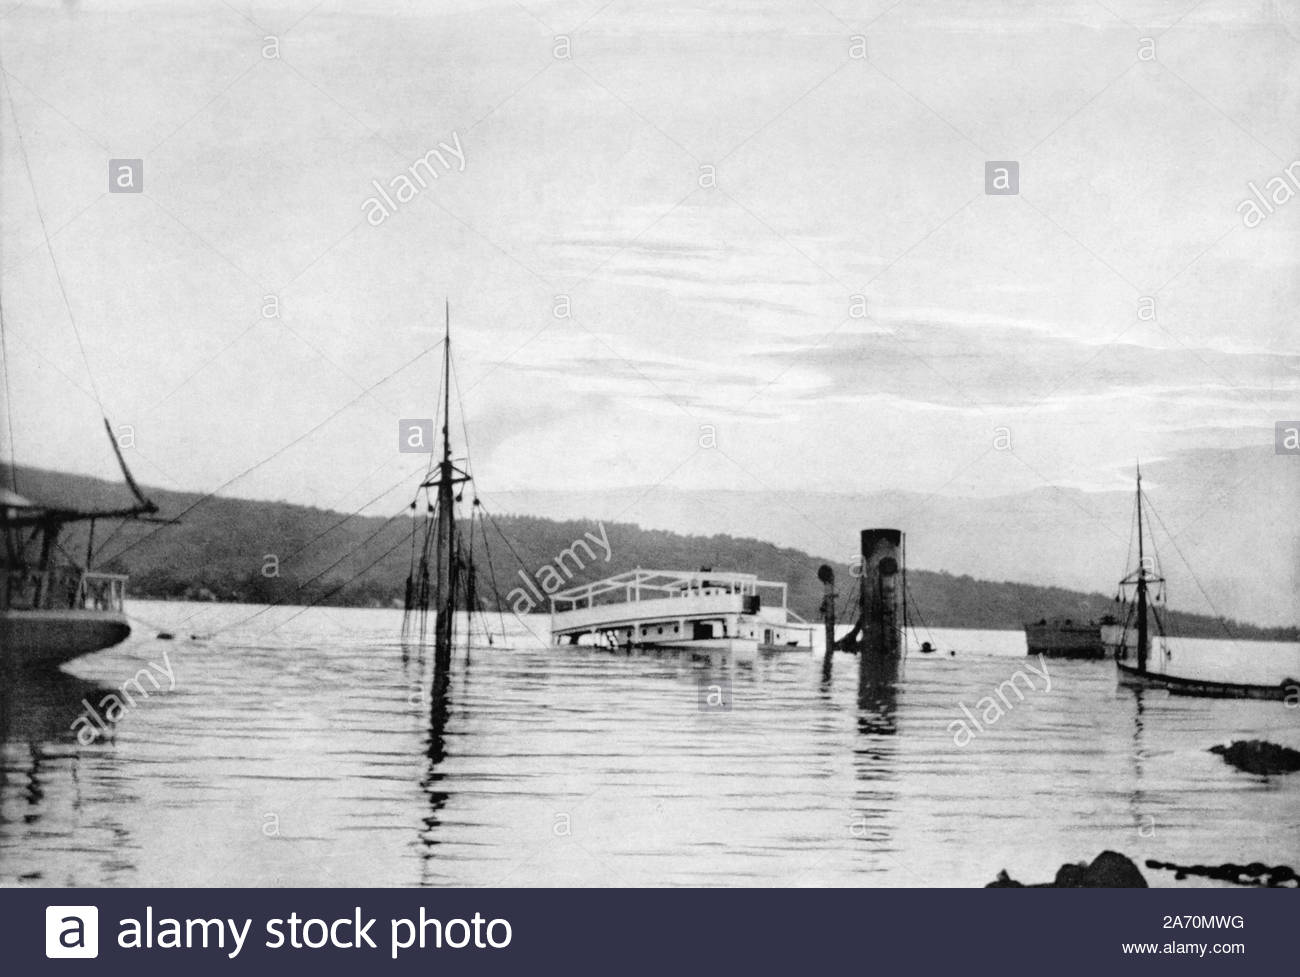 WW1 Papeete harbour Tahiti after German bombardment by warships Scharnhorst and Gneisenau, vintage photograph from 1914 Stock Photo